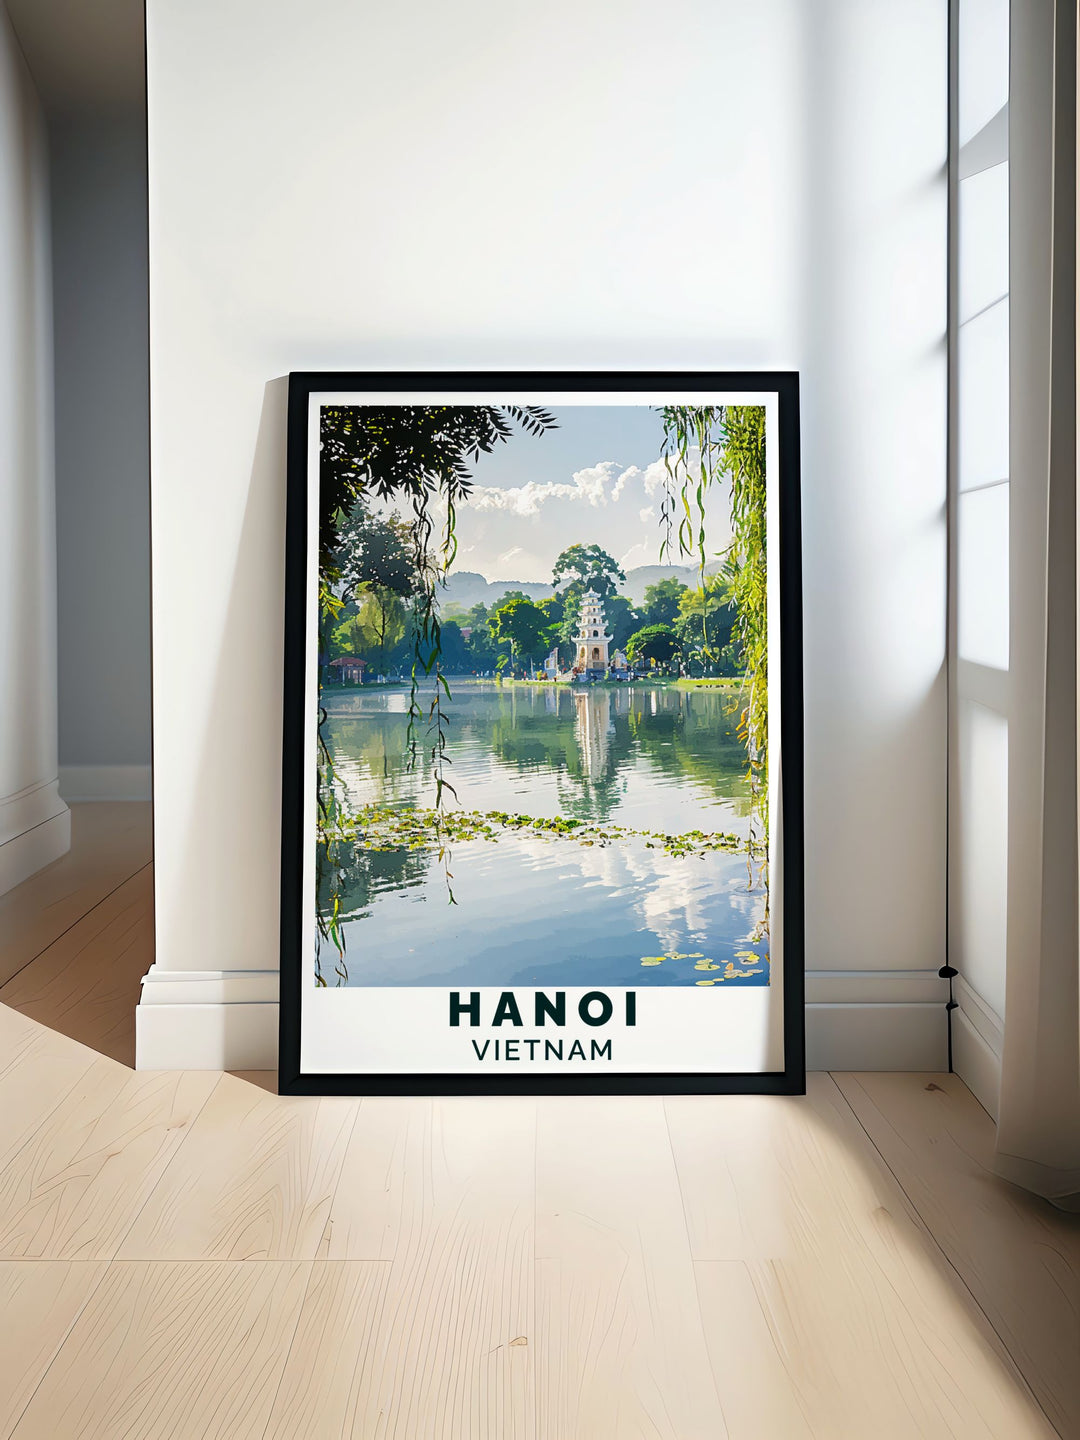 The travel poster of Hoan Kiem Lake captures its serene waters and historic significance, highlighting the peaceful charm of this iconic landmark in Hanoi, Vietnam.